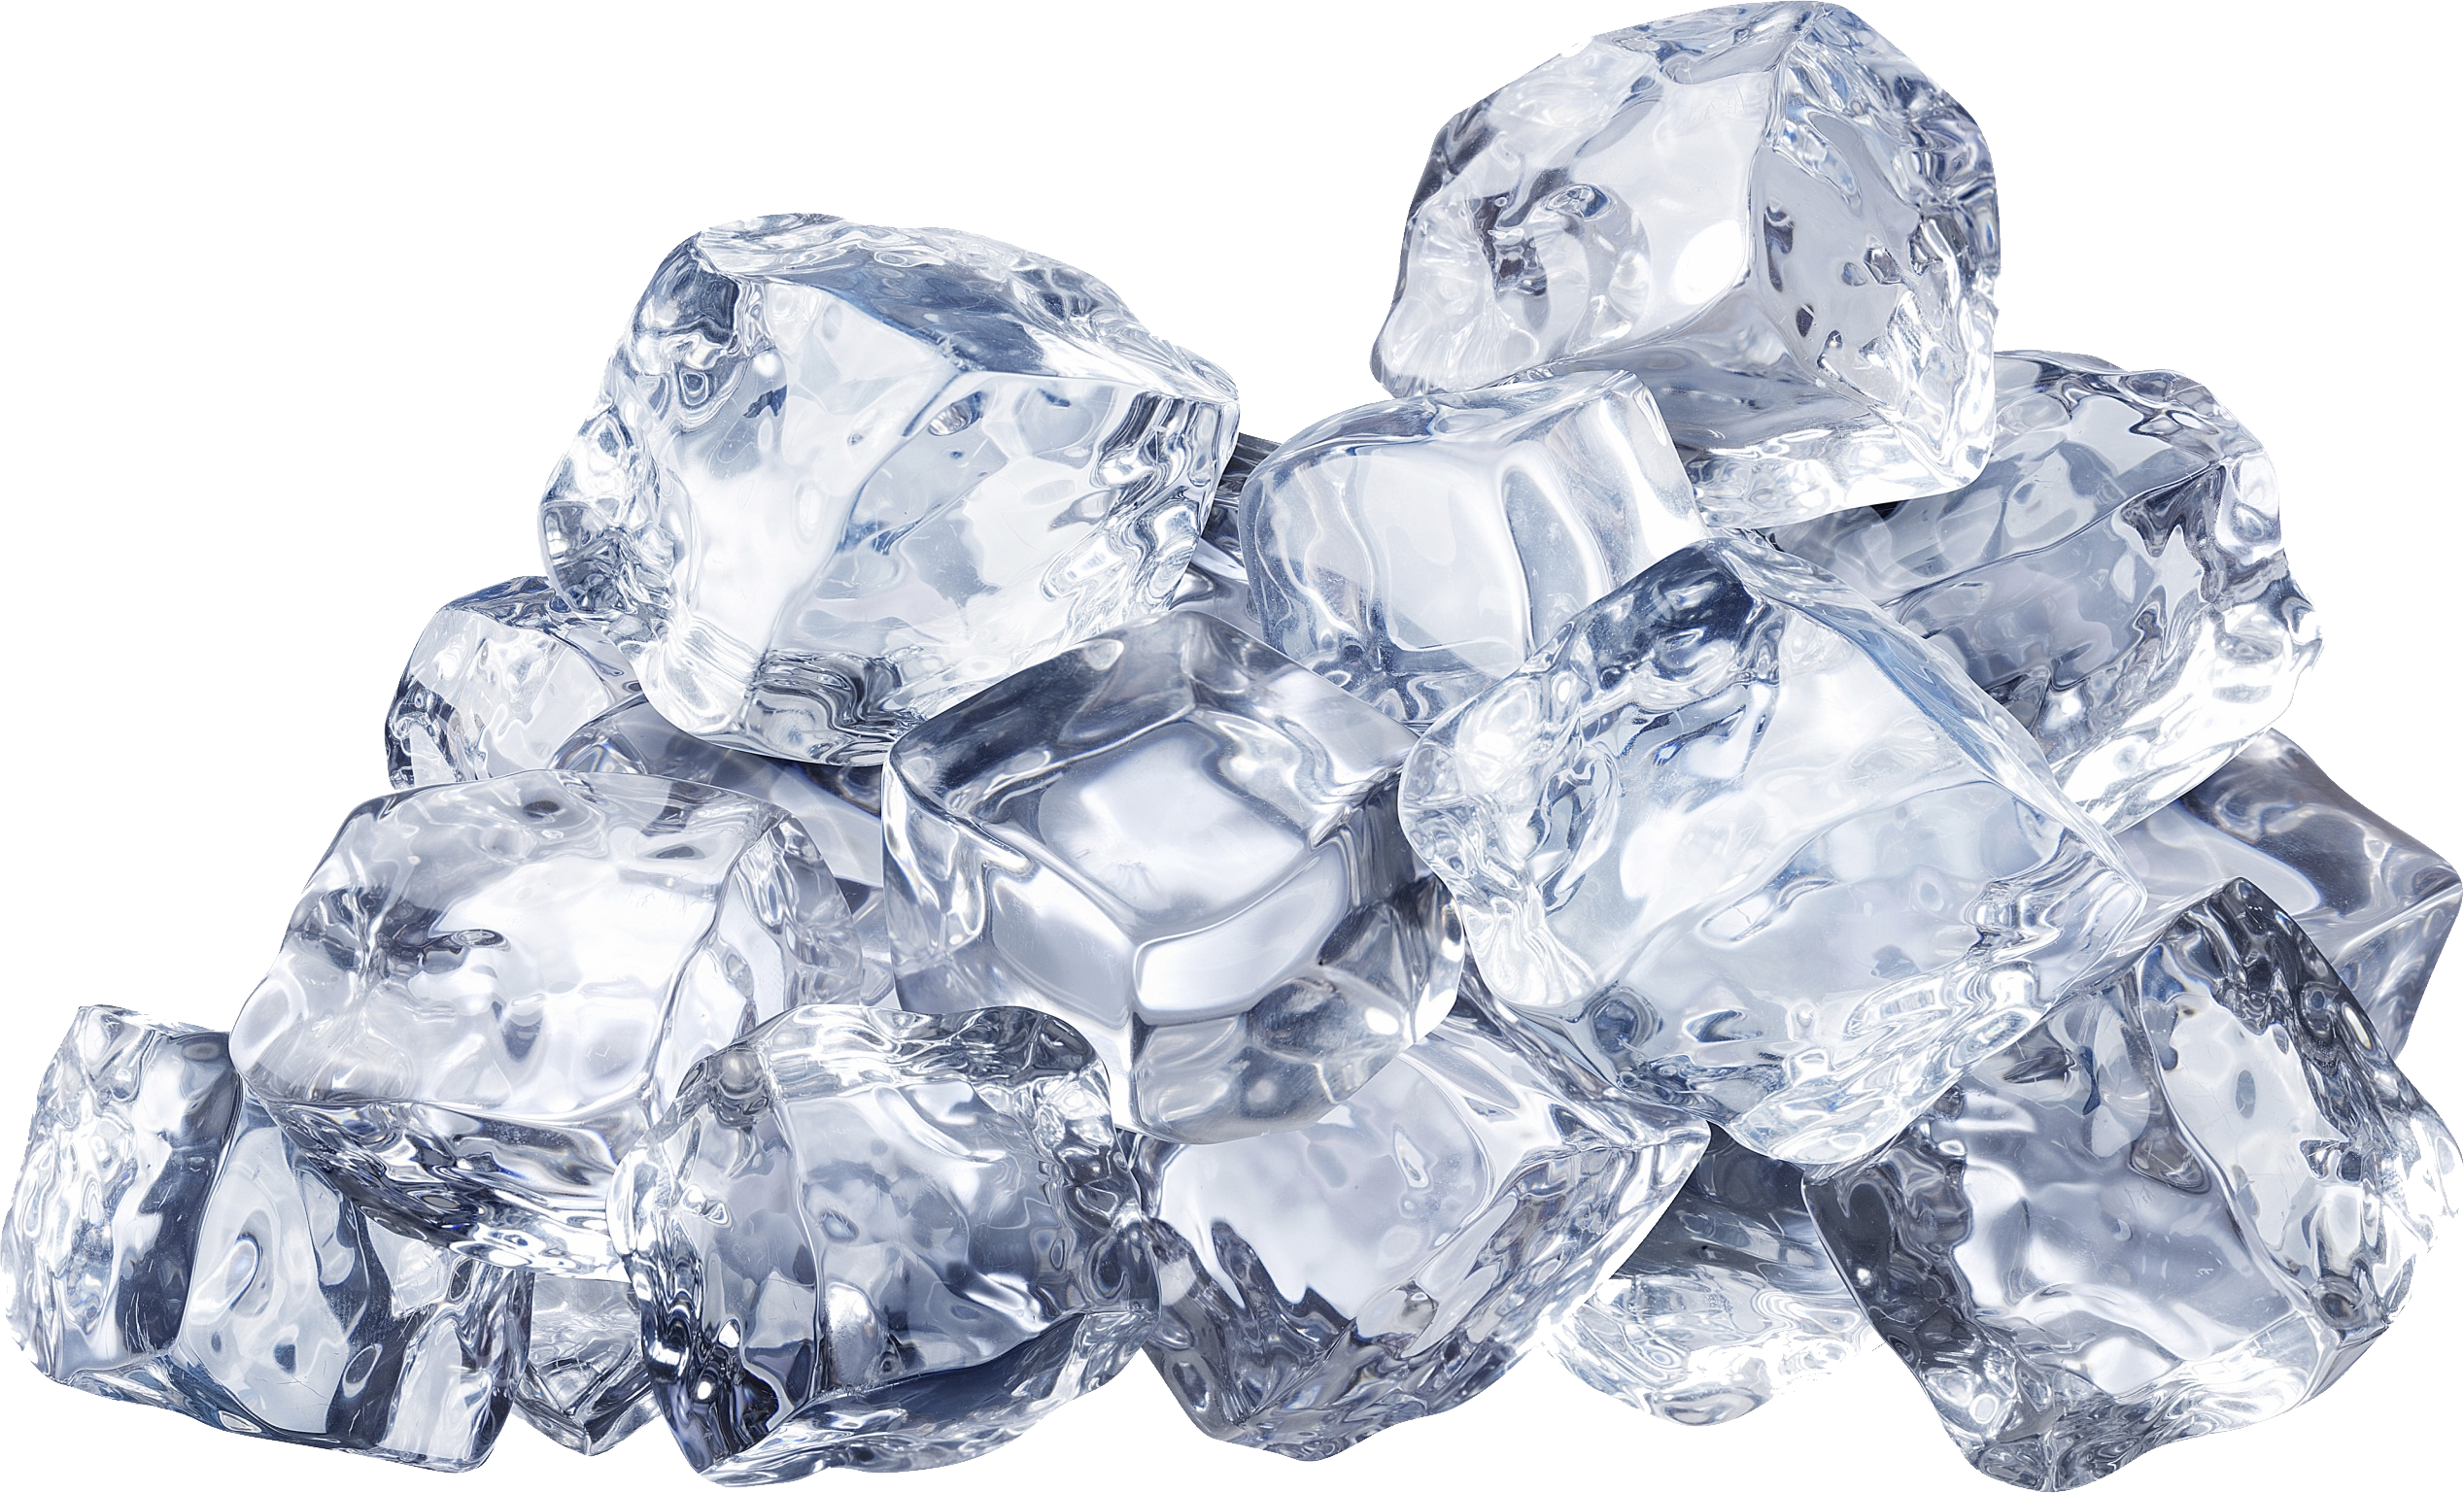 Png image purepng free. Ice clipart ice crystal